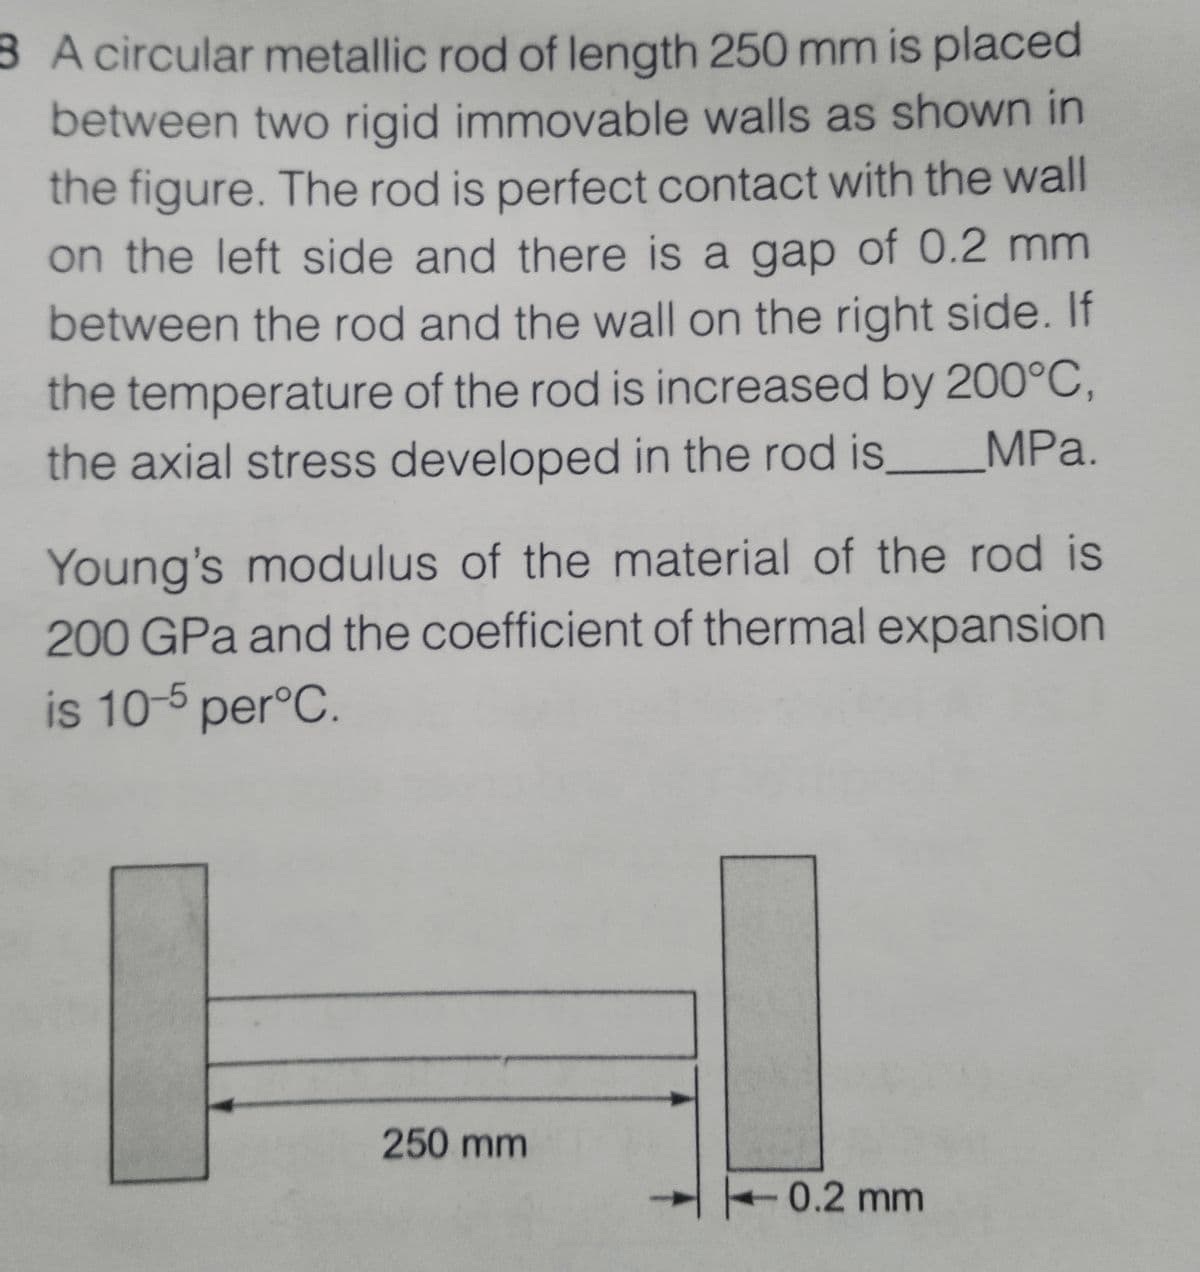 8 A circular metallic rod of length 250 mm is placed
between two rigid immovable walls as shown in
the figure. The rod is perfect contact with the wall
on the left side and there is a gap of 0.2 mm
between the rod and the wall on the right side. If
the temperature of the rod is increased by 200°C,
the axial stress developed in the rod is,
MPa.
Young's modulus of the material of the rod is
200 GPa and the coefficient of thermal expansion
is 10-5 per°C.
250 mm
0.2 mm
